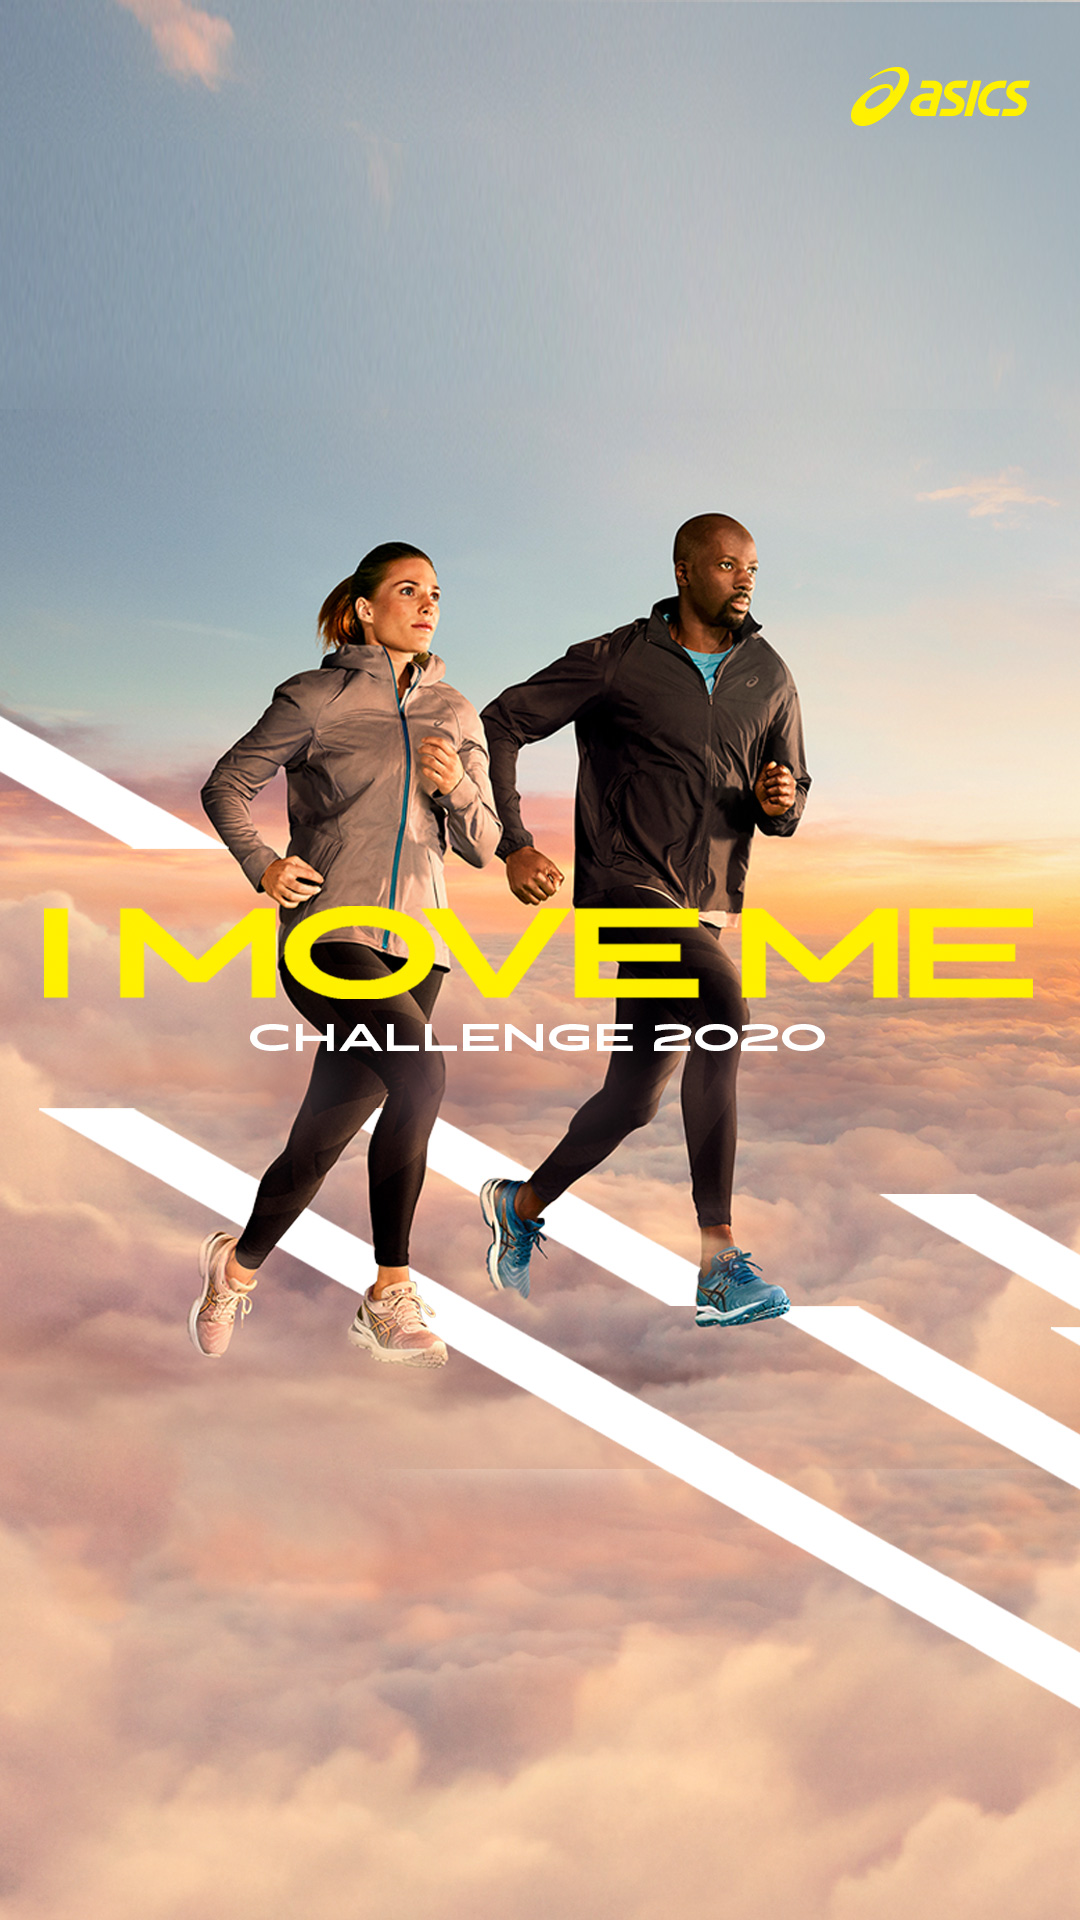 Outrun yourself in ASICS’ inaugural #IMOVEME CHALLENGE 2020